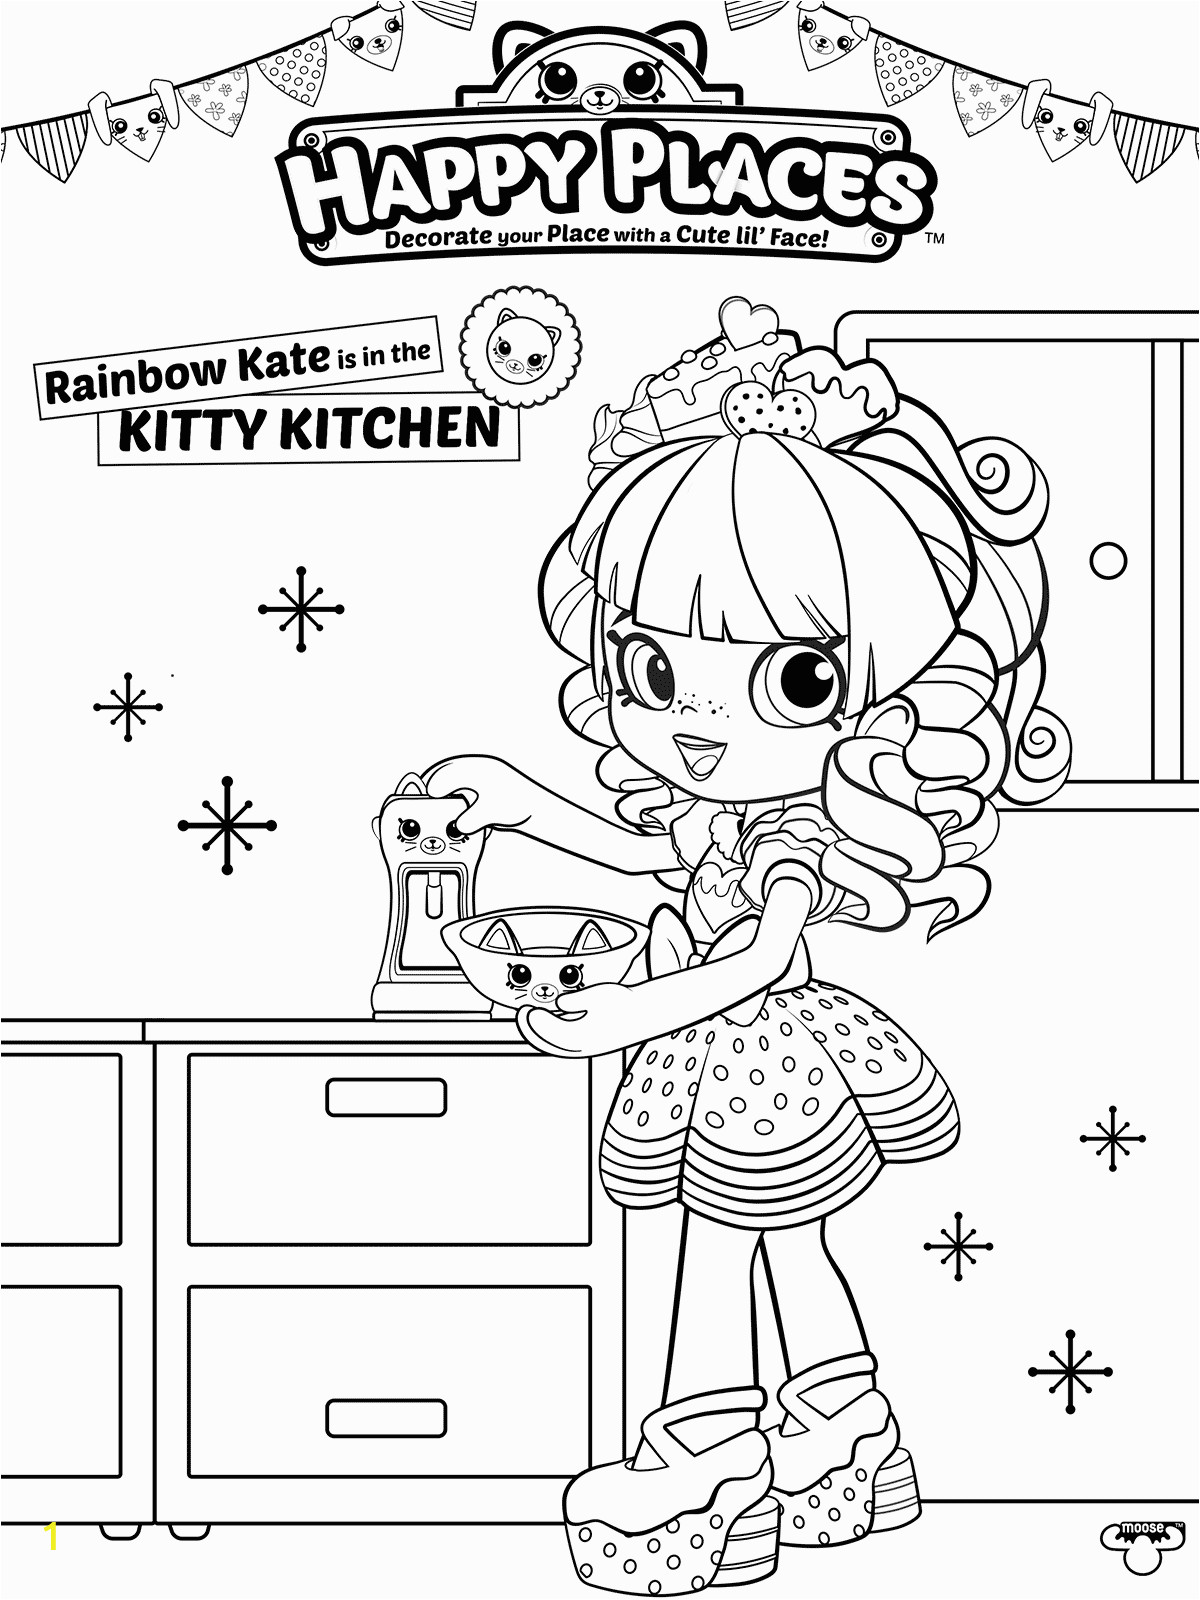 Queen Mary Coloring Pages Happy Places